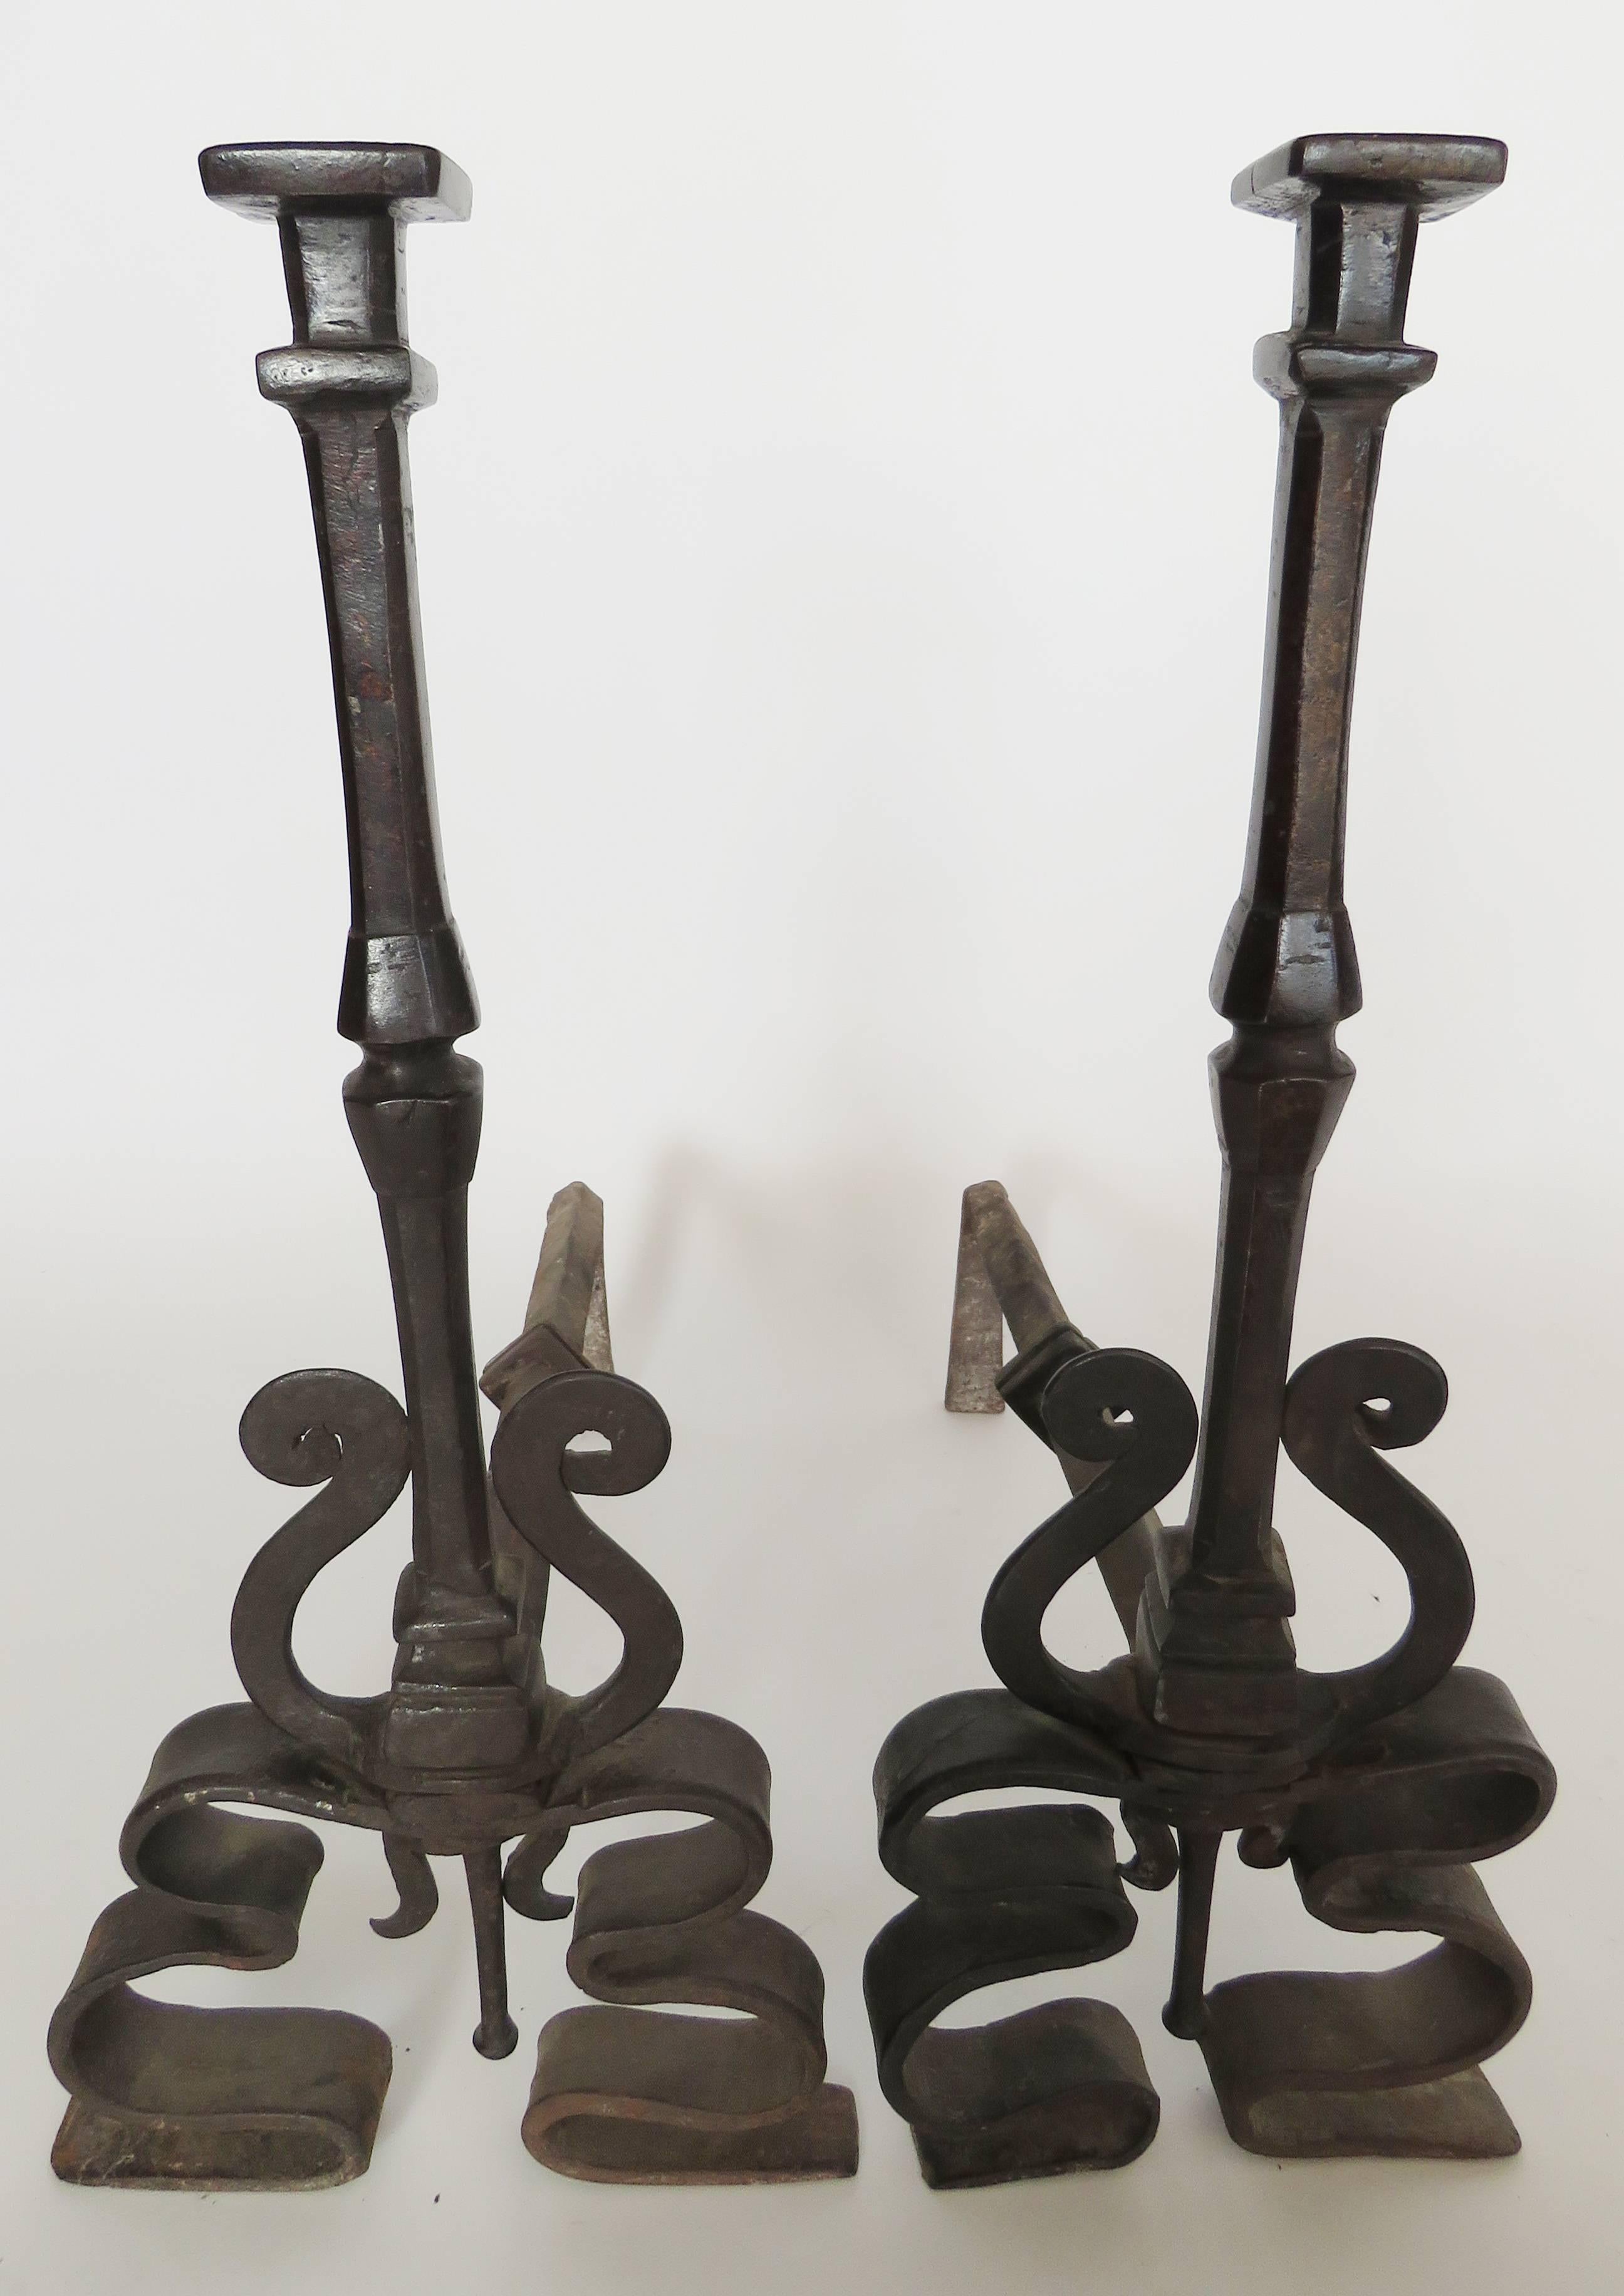 Etched wrought iron andirons with knob finials over scroll bases.